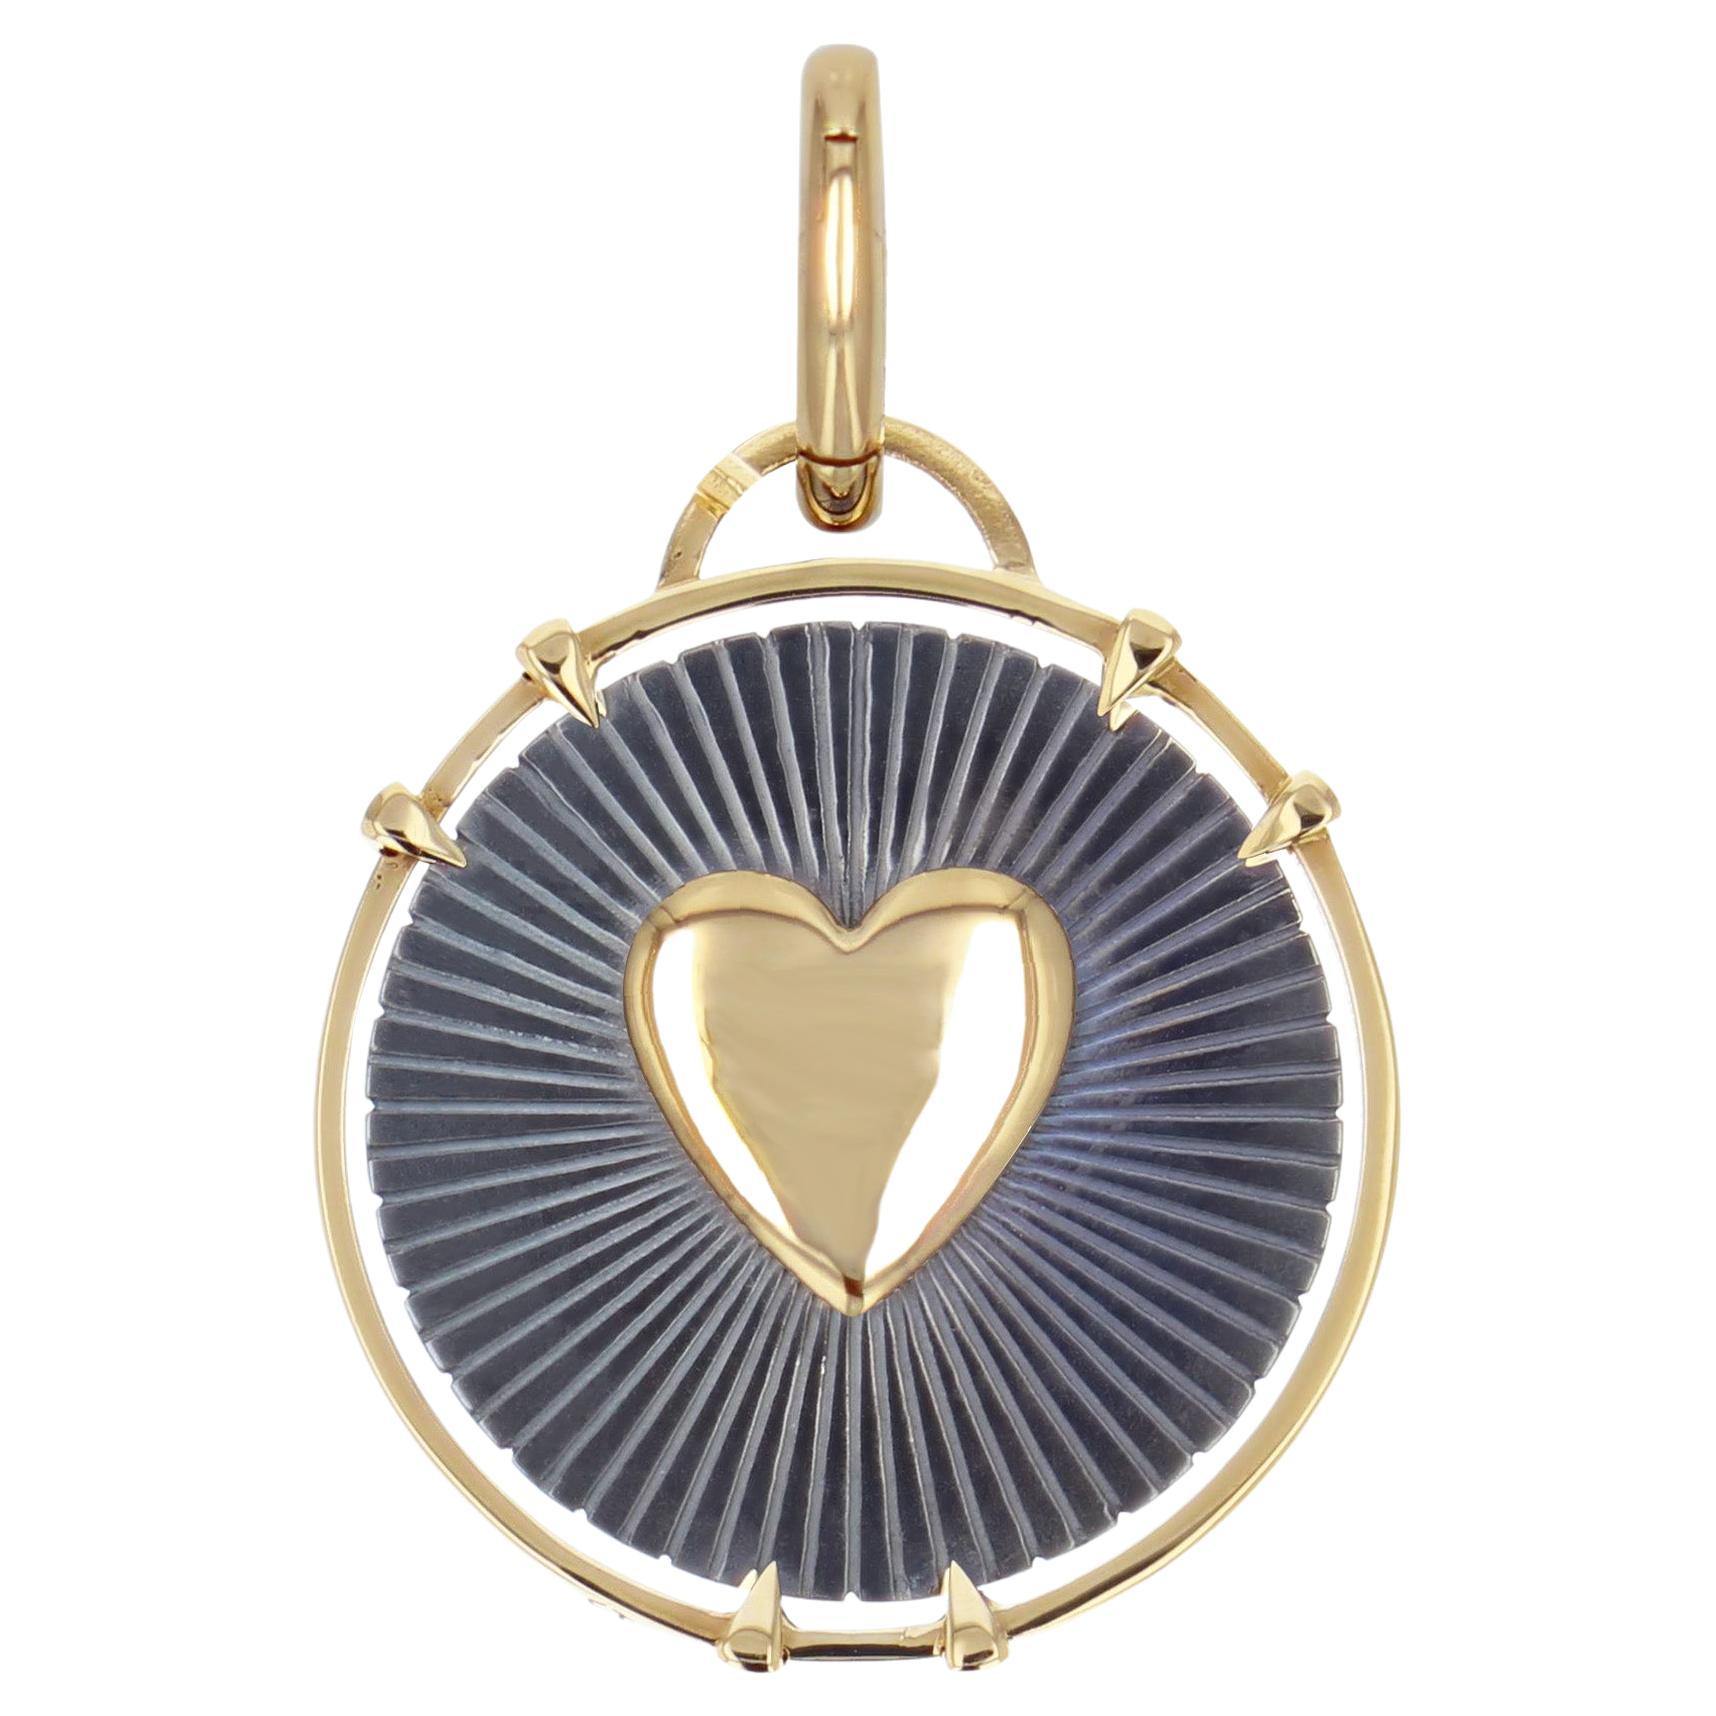 EAU 4 Elements Diamond & Green Lacquer Heart Charm in 18k Gold by Elie Top